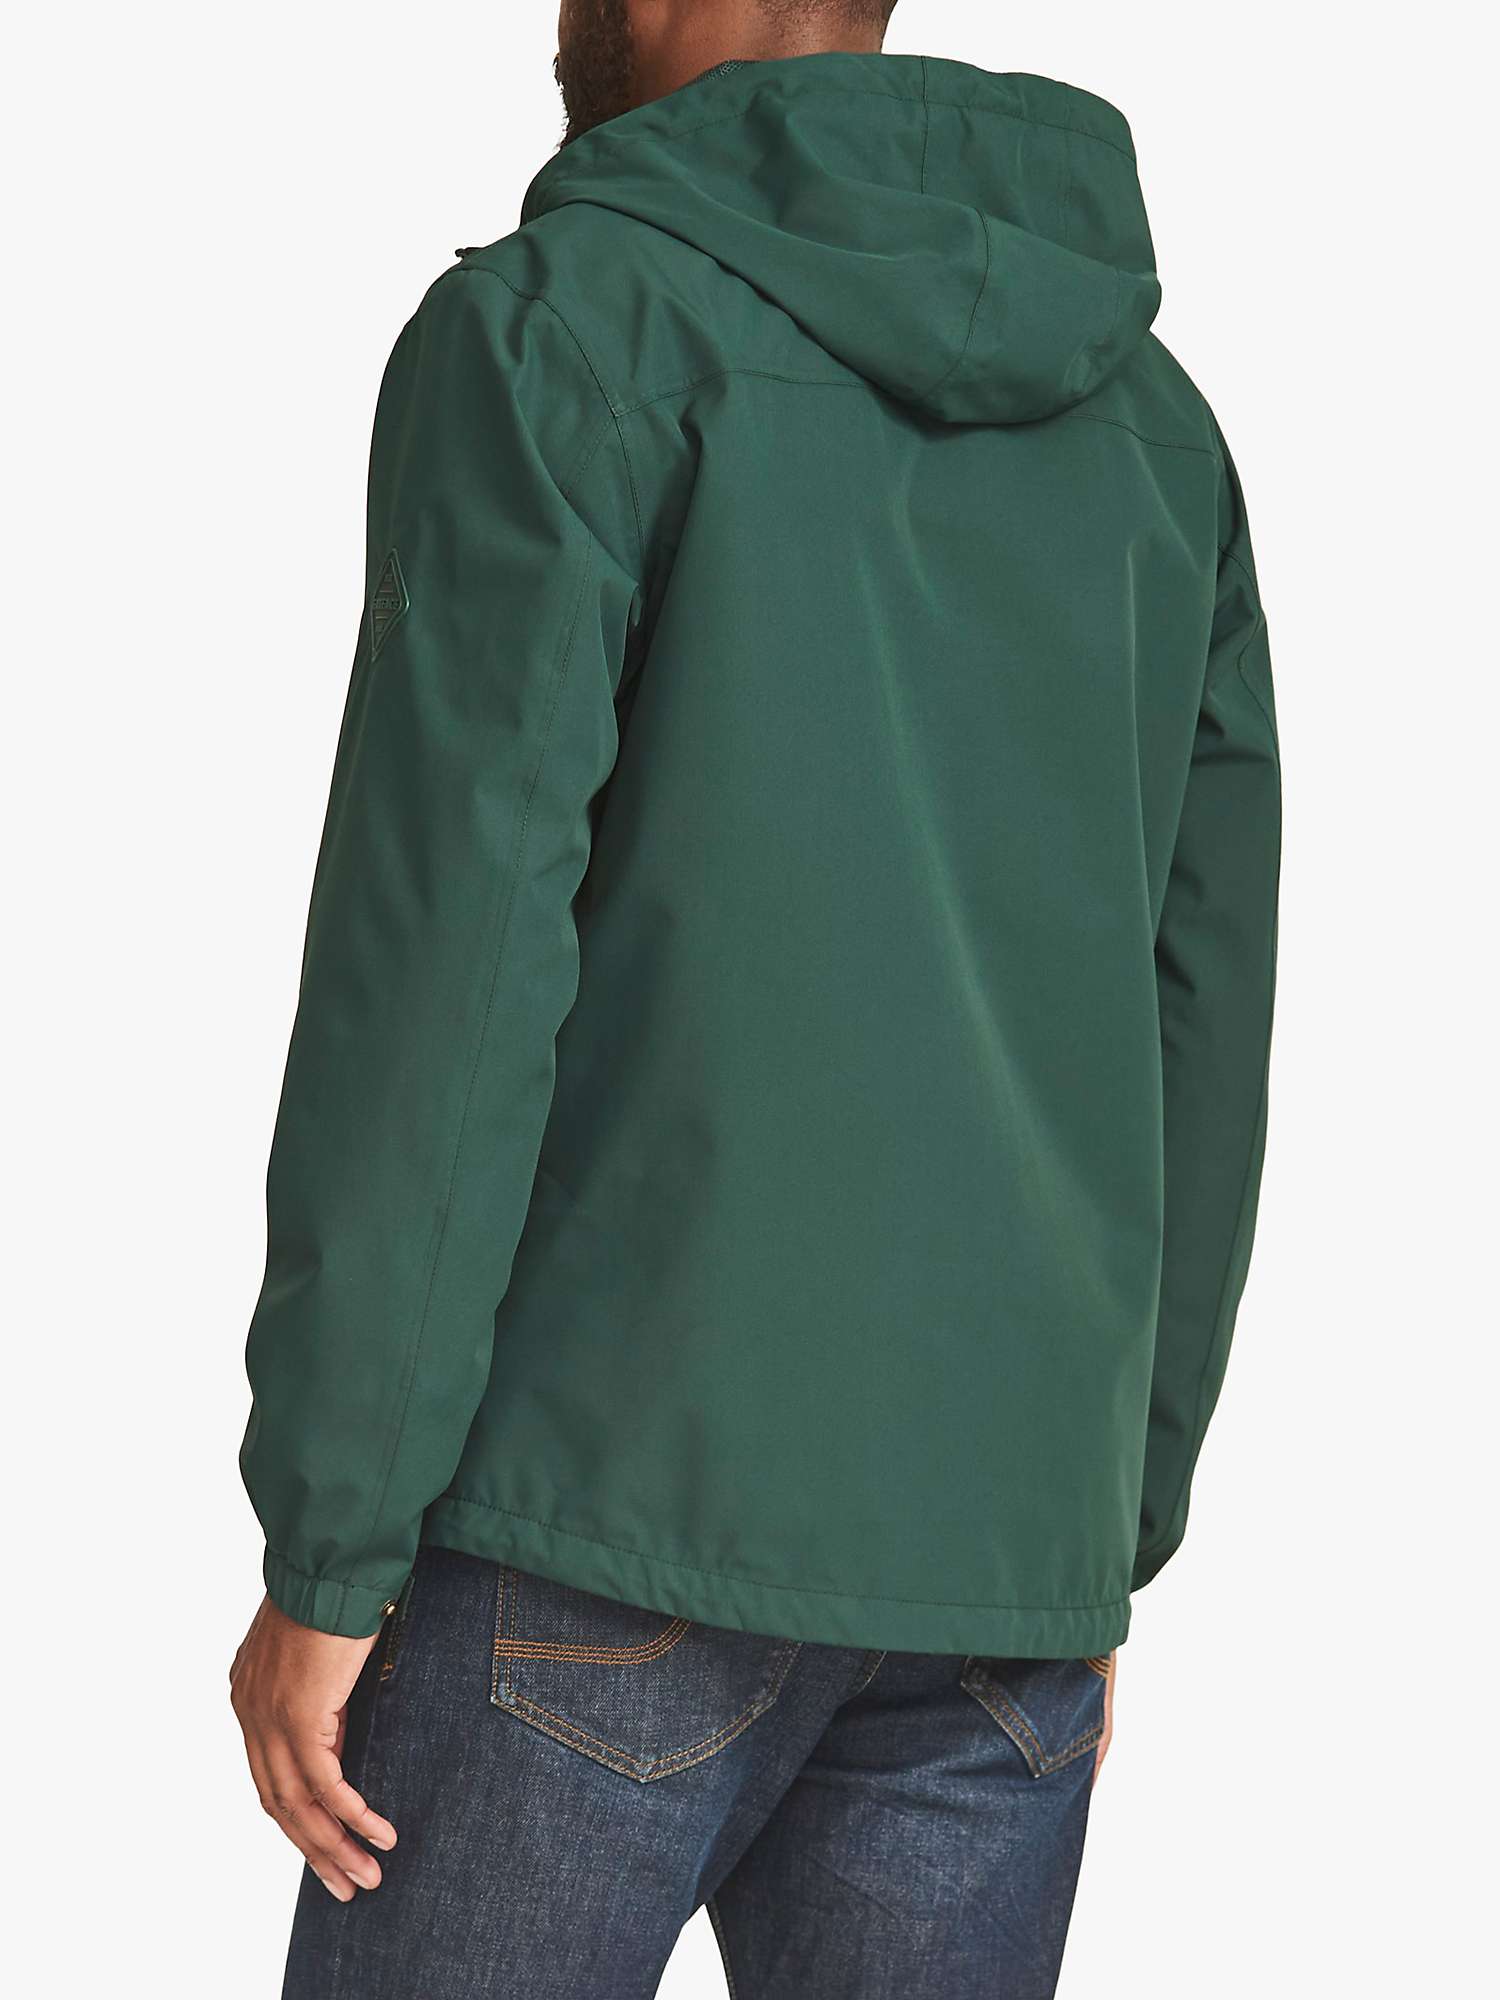 Buy FatFace Performance Hooded Jacket Online at johnlewis.com